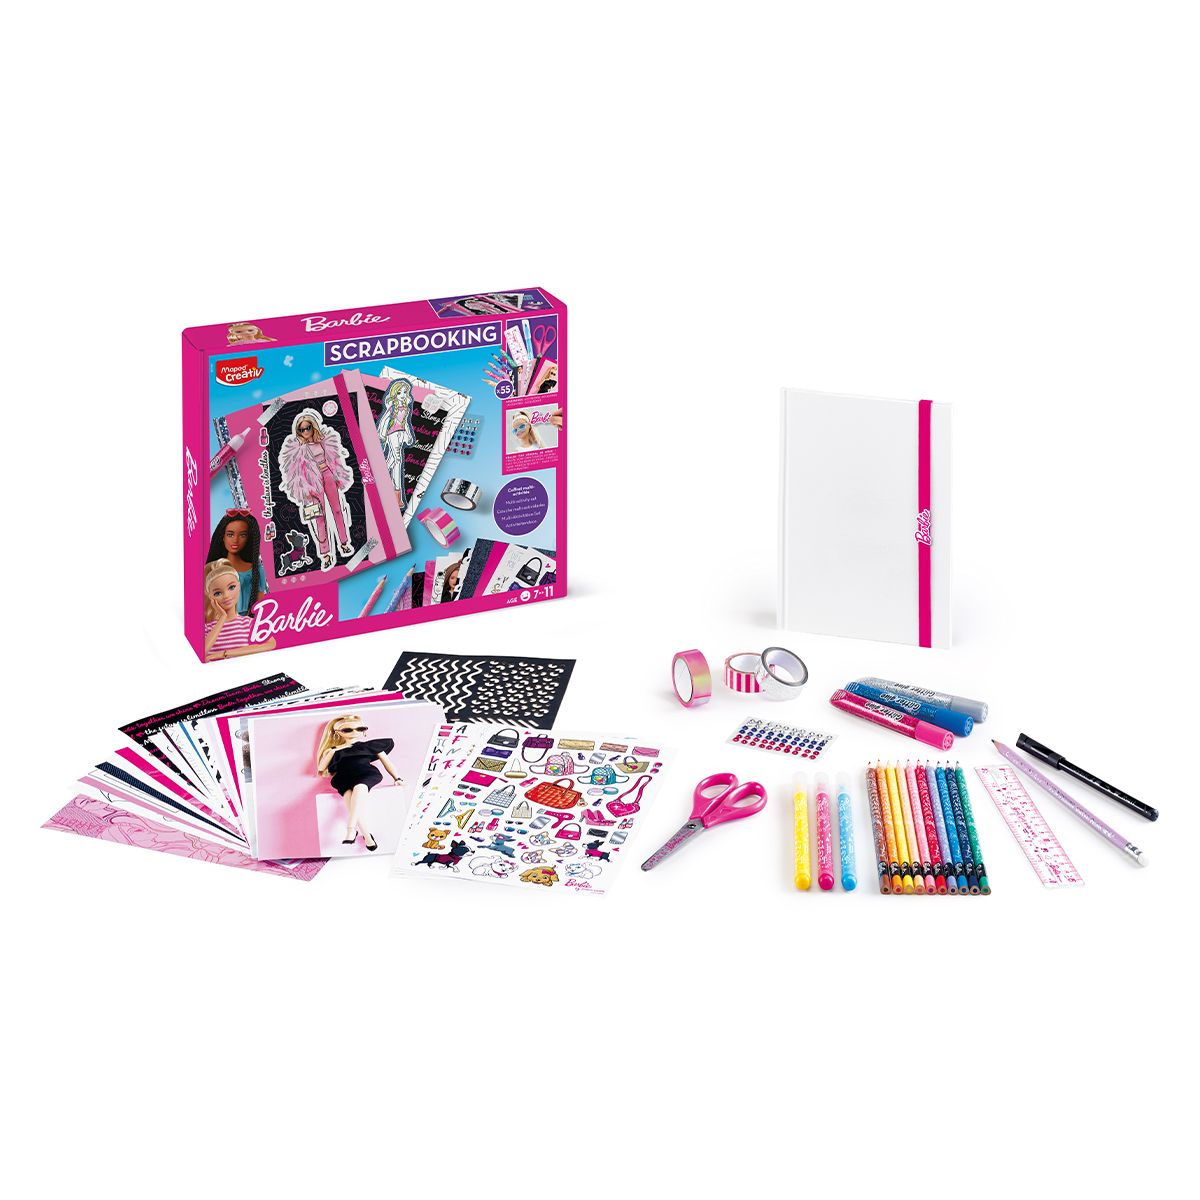 Maped Barbie Scrapbooking Giftset 55 pièces